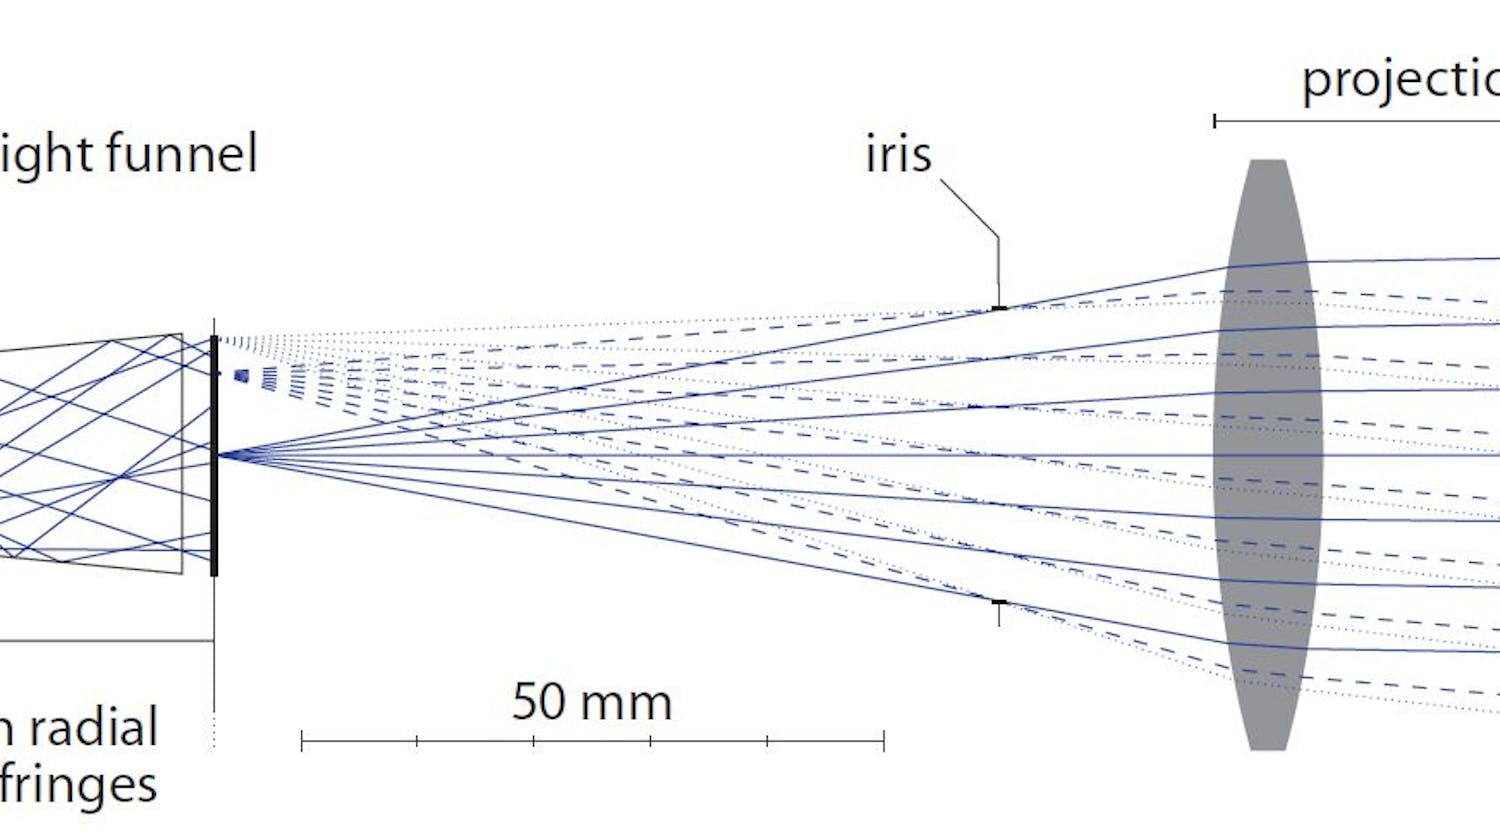 FIGURE 1. Optical design (side view) of the SWIR GOBO projector system comprising a SWIR LED, a light funnel, a rotating GOBO wheel, and a three-element objective lens.